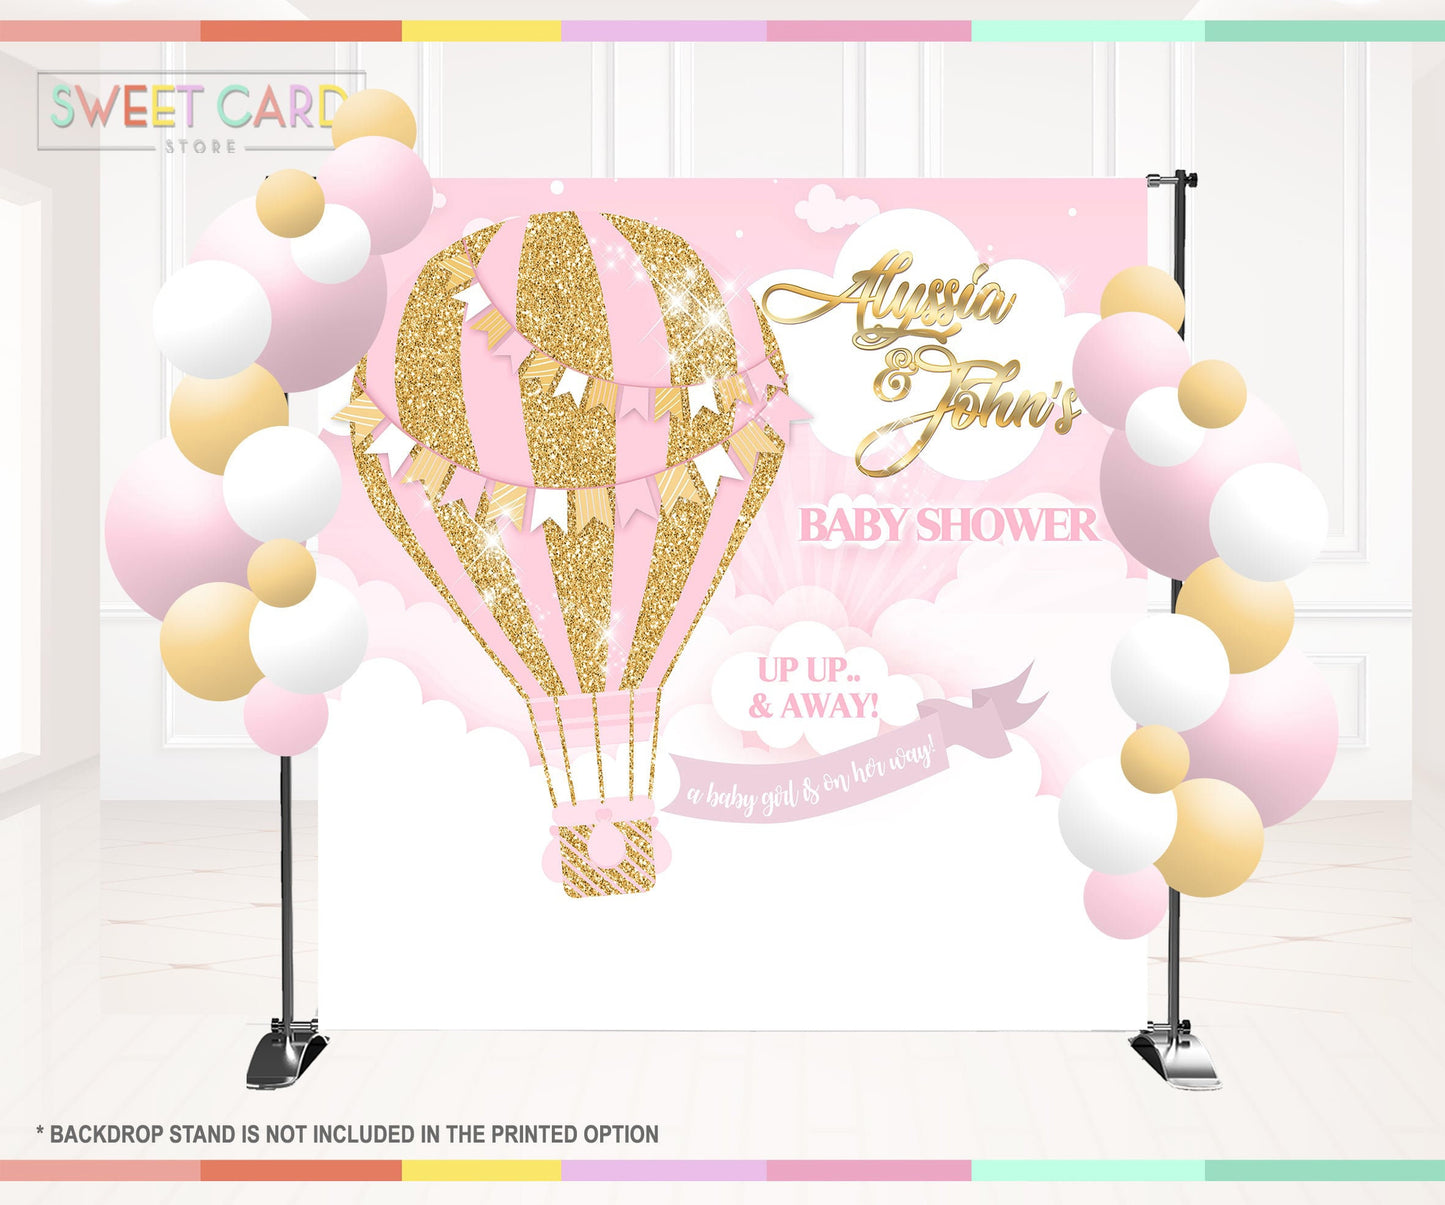 Hot air balloon girl Baby shower backdrop, Up Up and away backdrop baby shower hot air balloon banner vintage travel baby shower backdrop